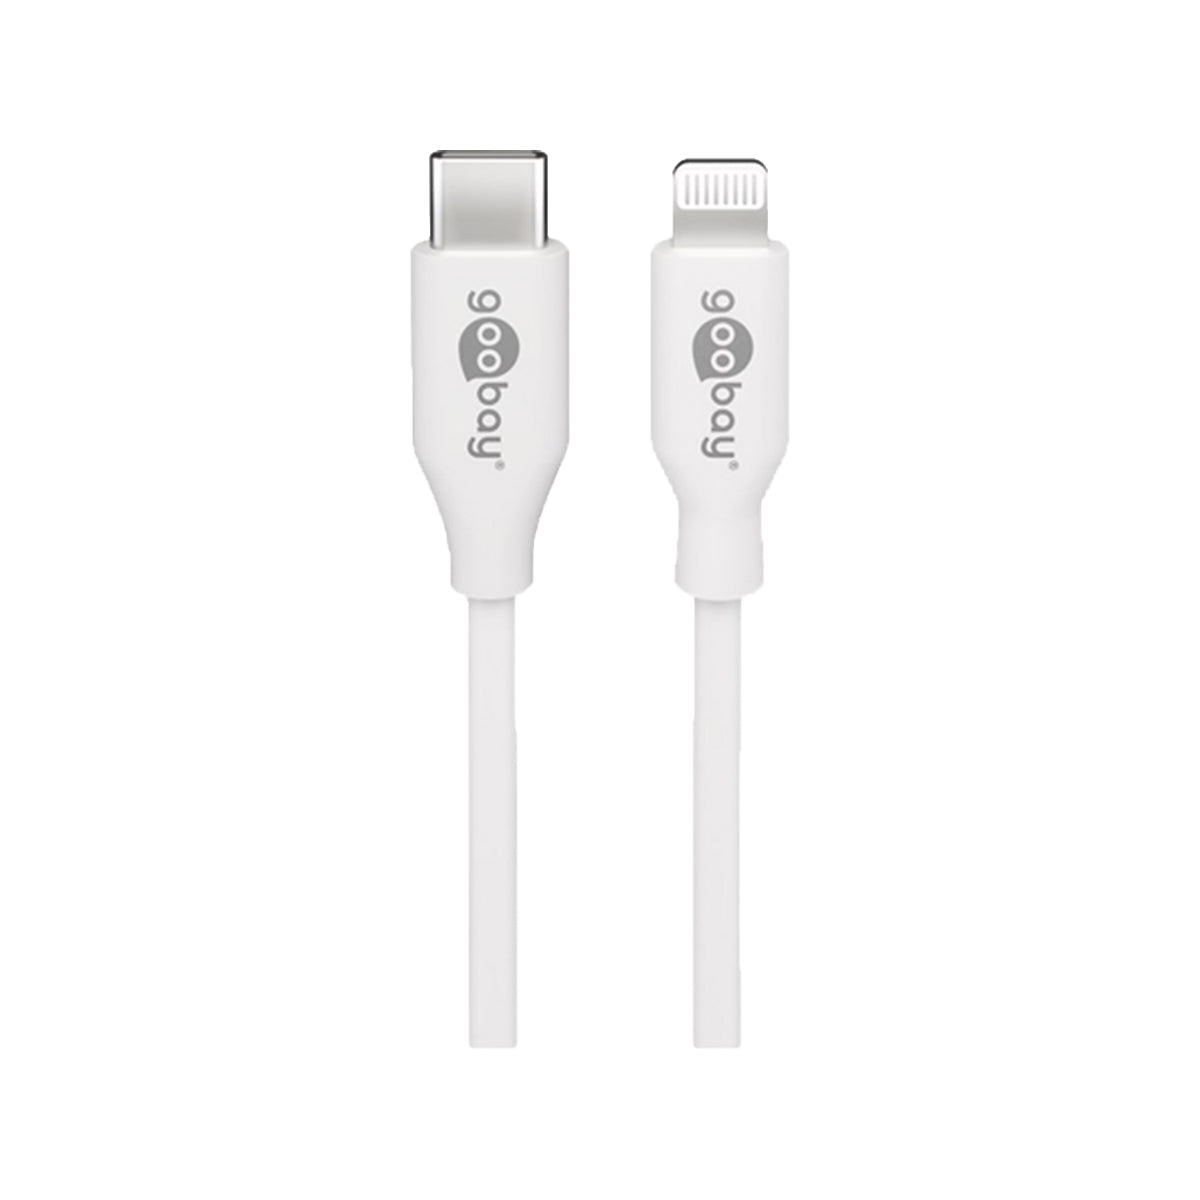 Goobay USB-C to Lightning Cable 1m for iPhone/iPad/iPod/AirPod - White